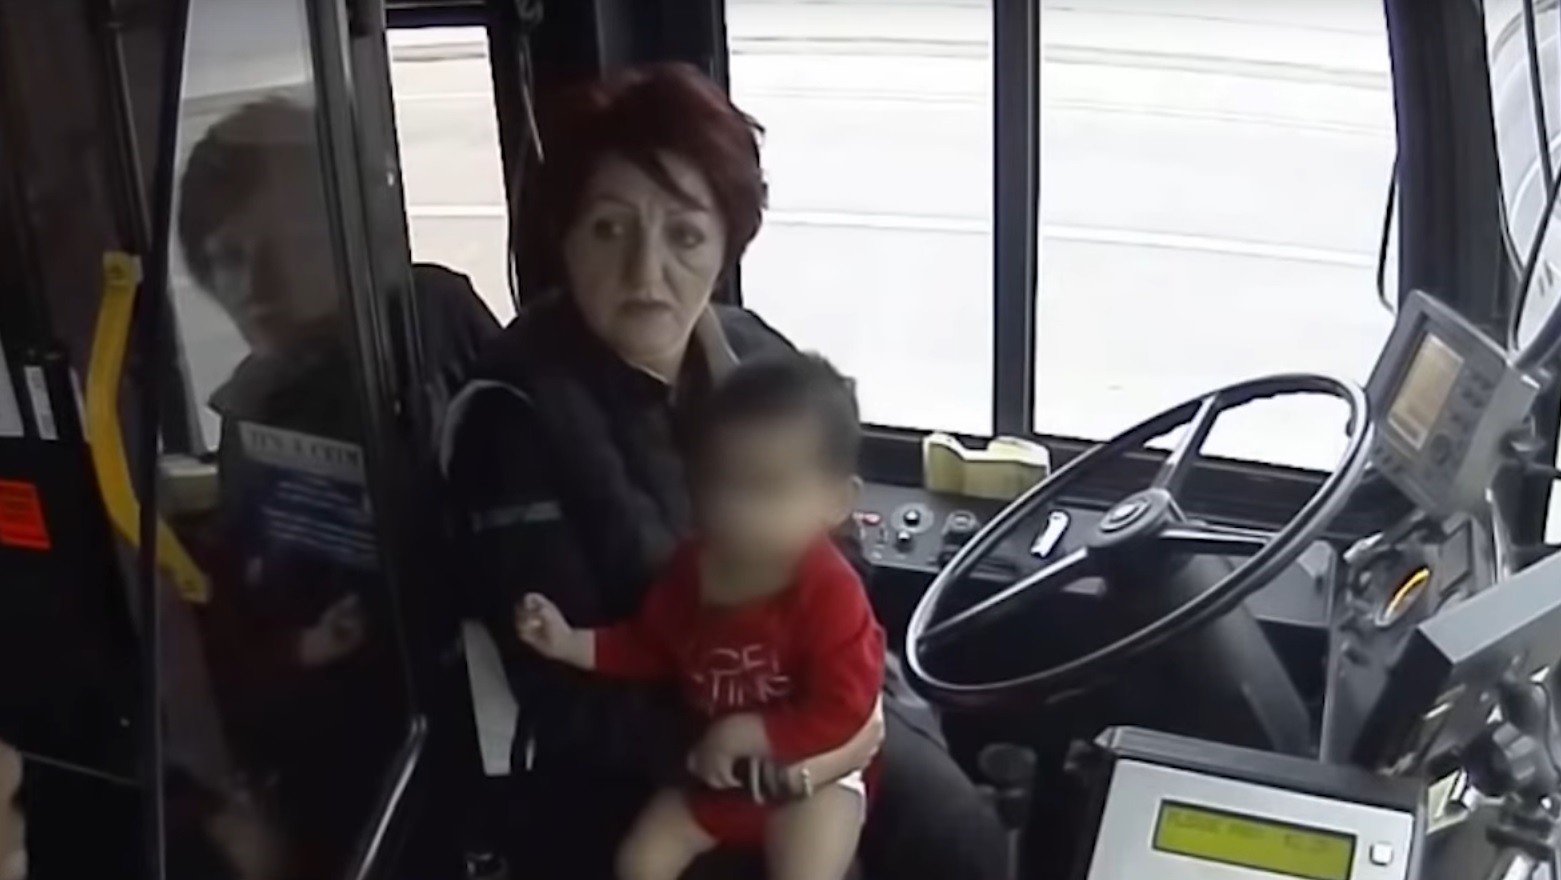 Screengrab from video shows driver Irena Ivic with the toddler inside the bus.